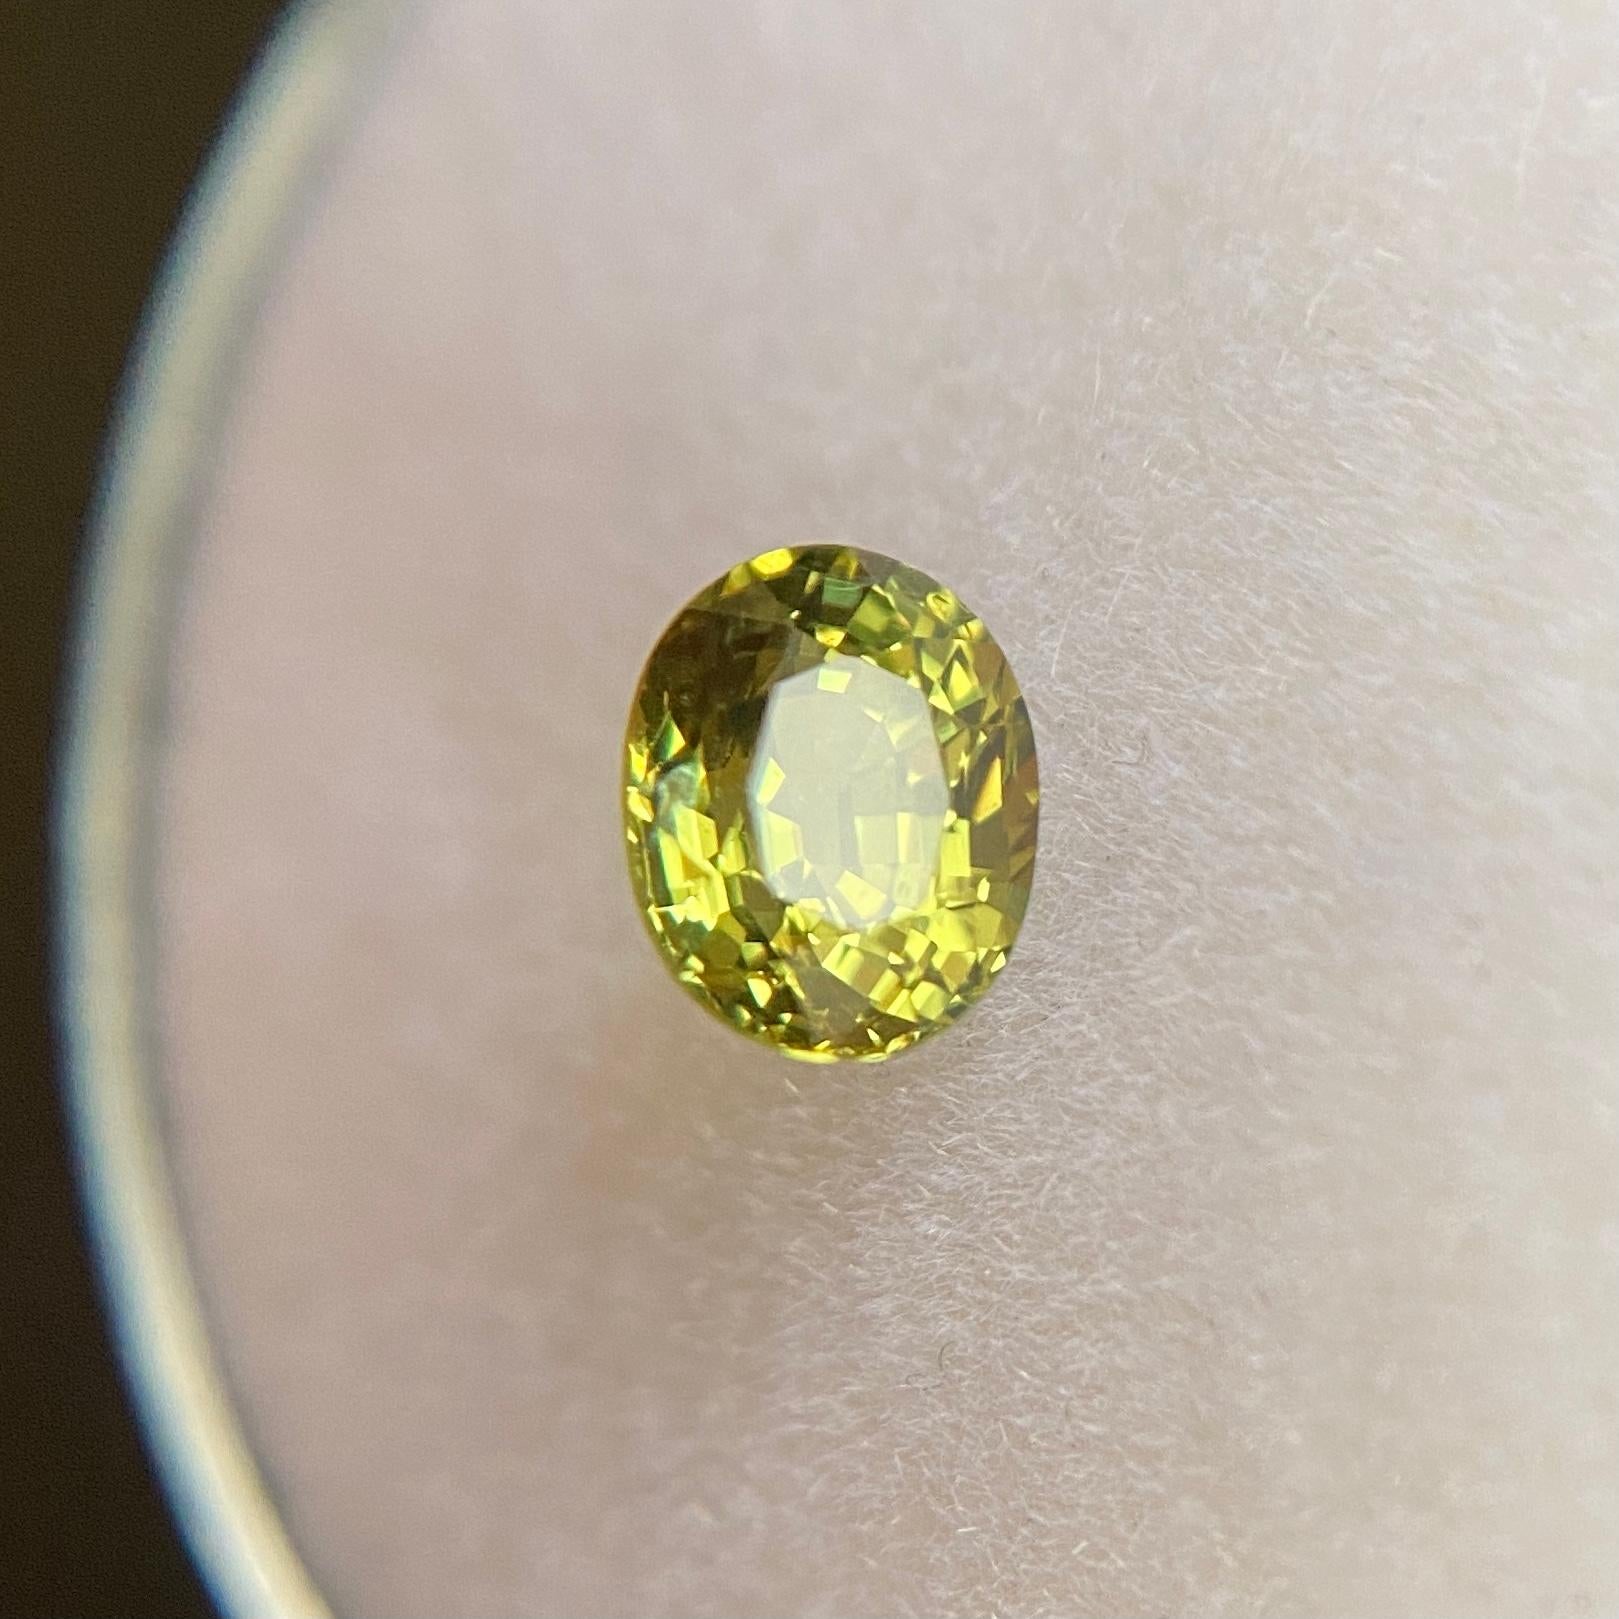 Fine Natural Untreated Yellow Green Australian Sapphire Gemstone.

0.80 Carat with a beautiful vivid yellow green colour and excellent clarity, a very clean stone.

Also has an excellent oval cut and ideal polish to show great shine and colour,